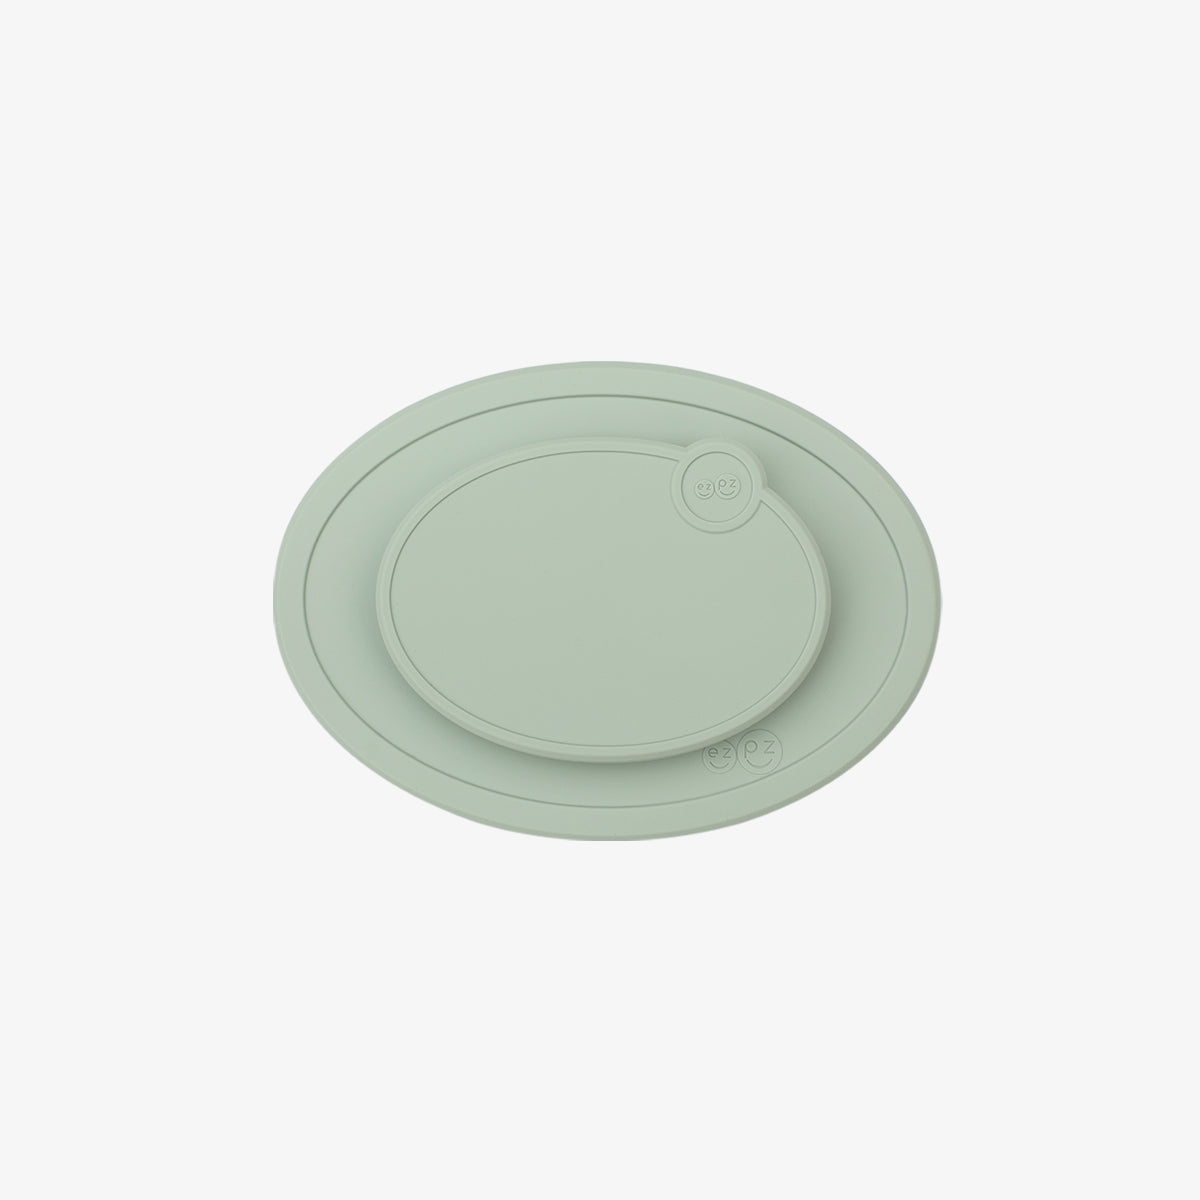 Mini Mat Lid in Sage / Storage Lids for the Mini Mat by ezpz / Silicone Lid for Toddler Plate